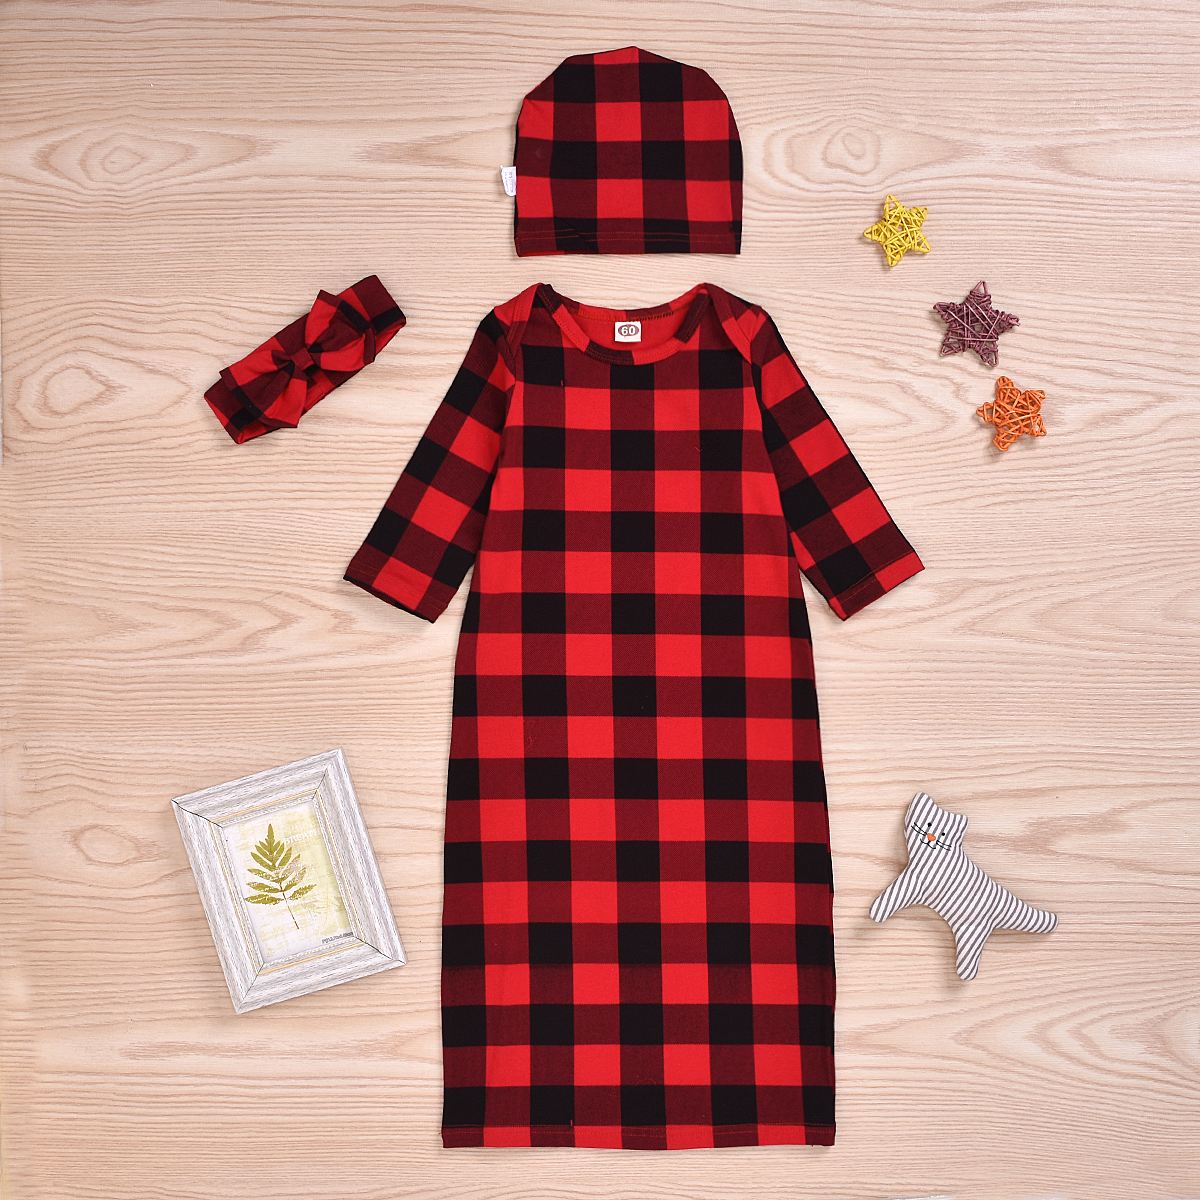 3-piece Baby Plaid Print Photography Prop Sleeping Bag Hat and Hairband Set